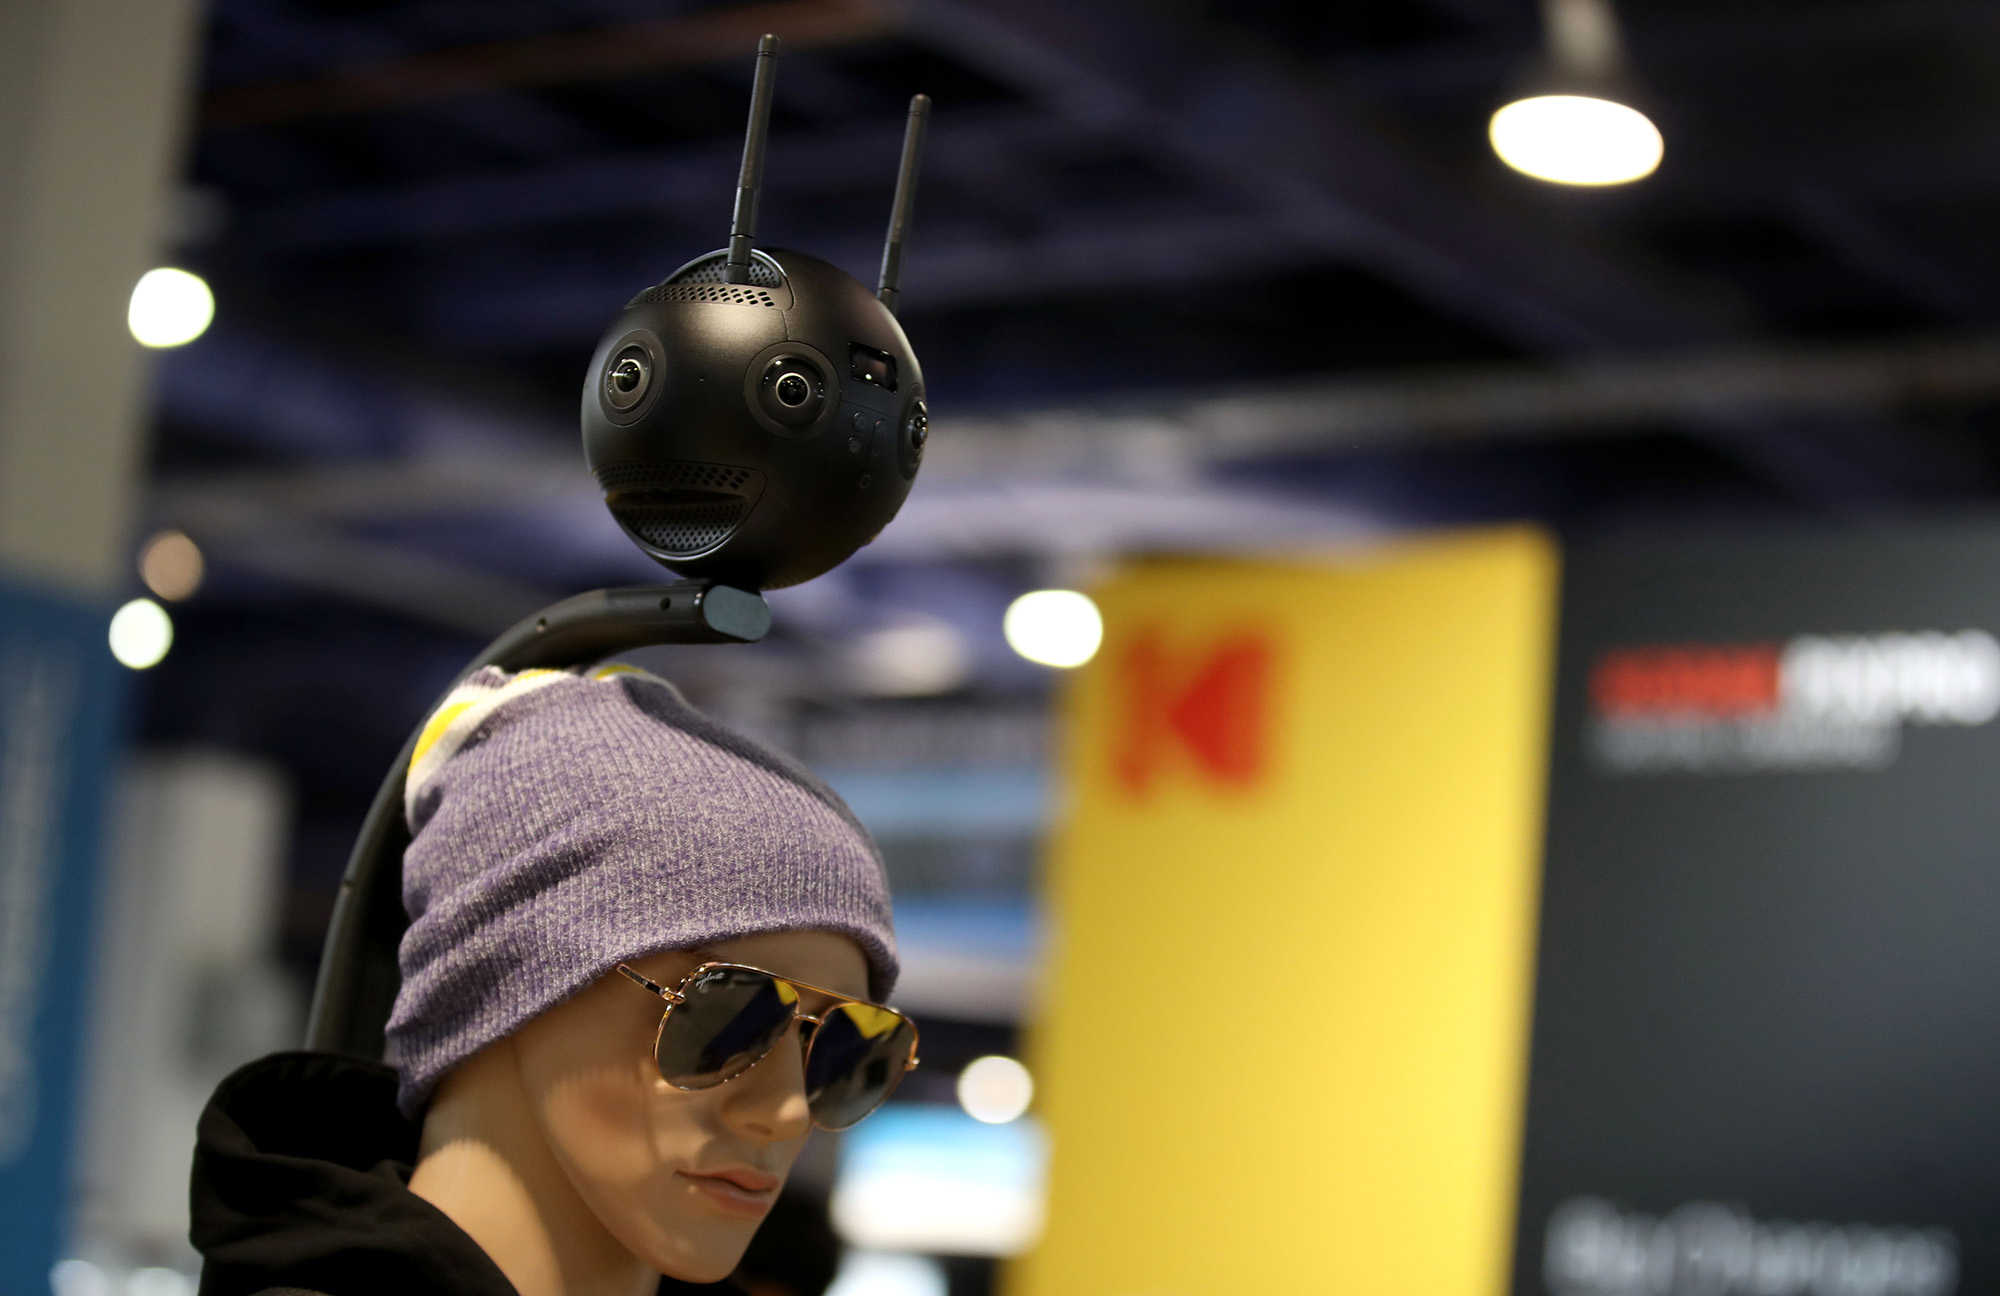 An Insta360 Pro 2 camera is displayed&nbsp;during CES 2019 at the Las Vegas Convention Center.